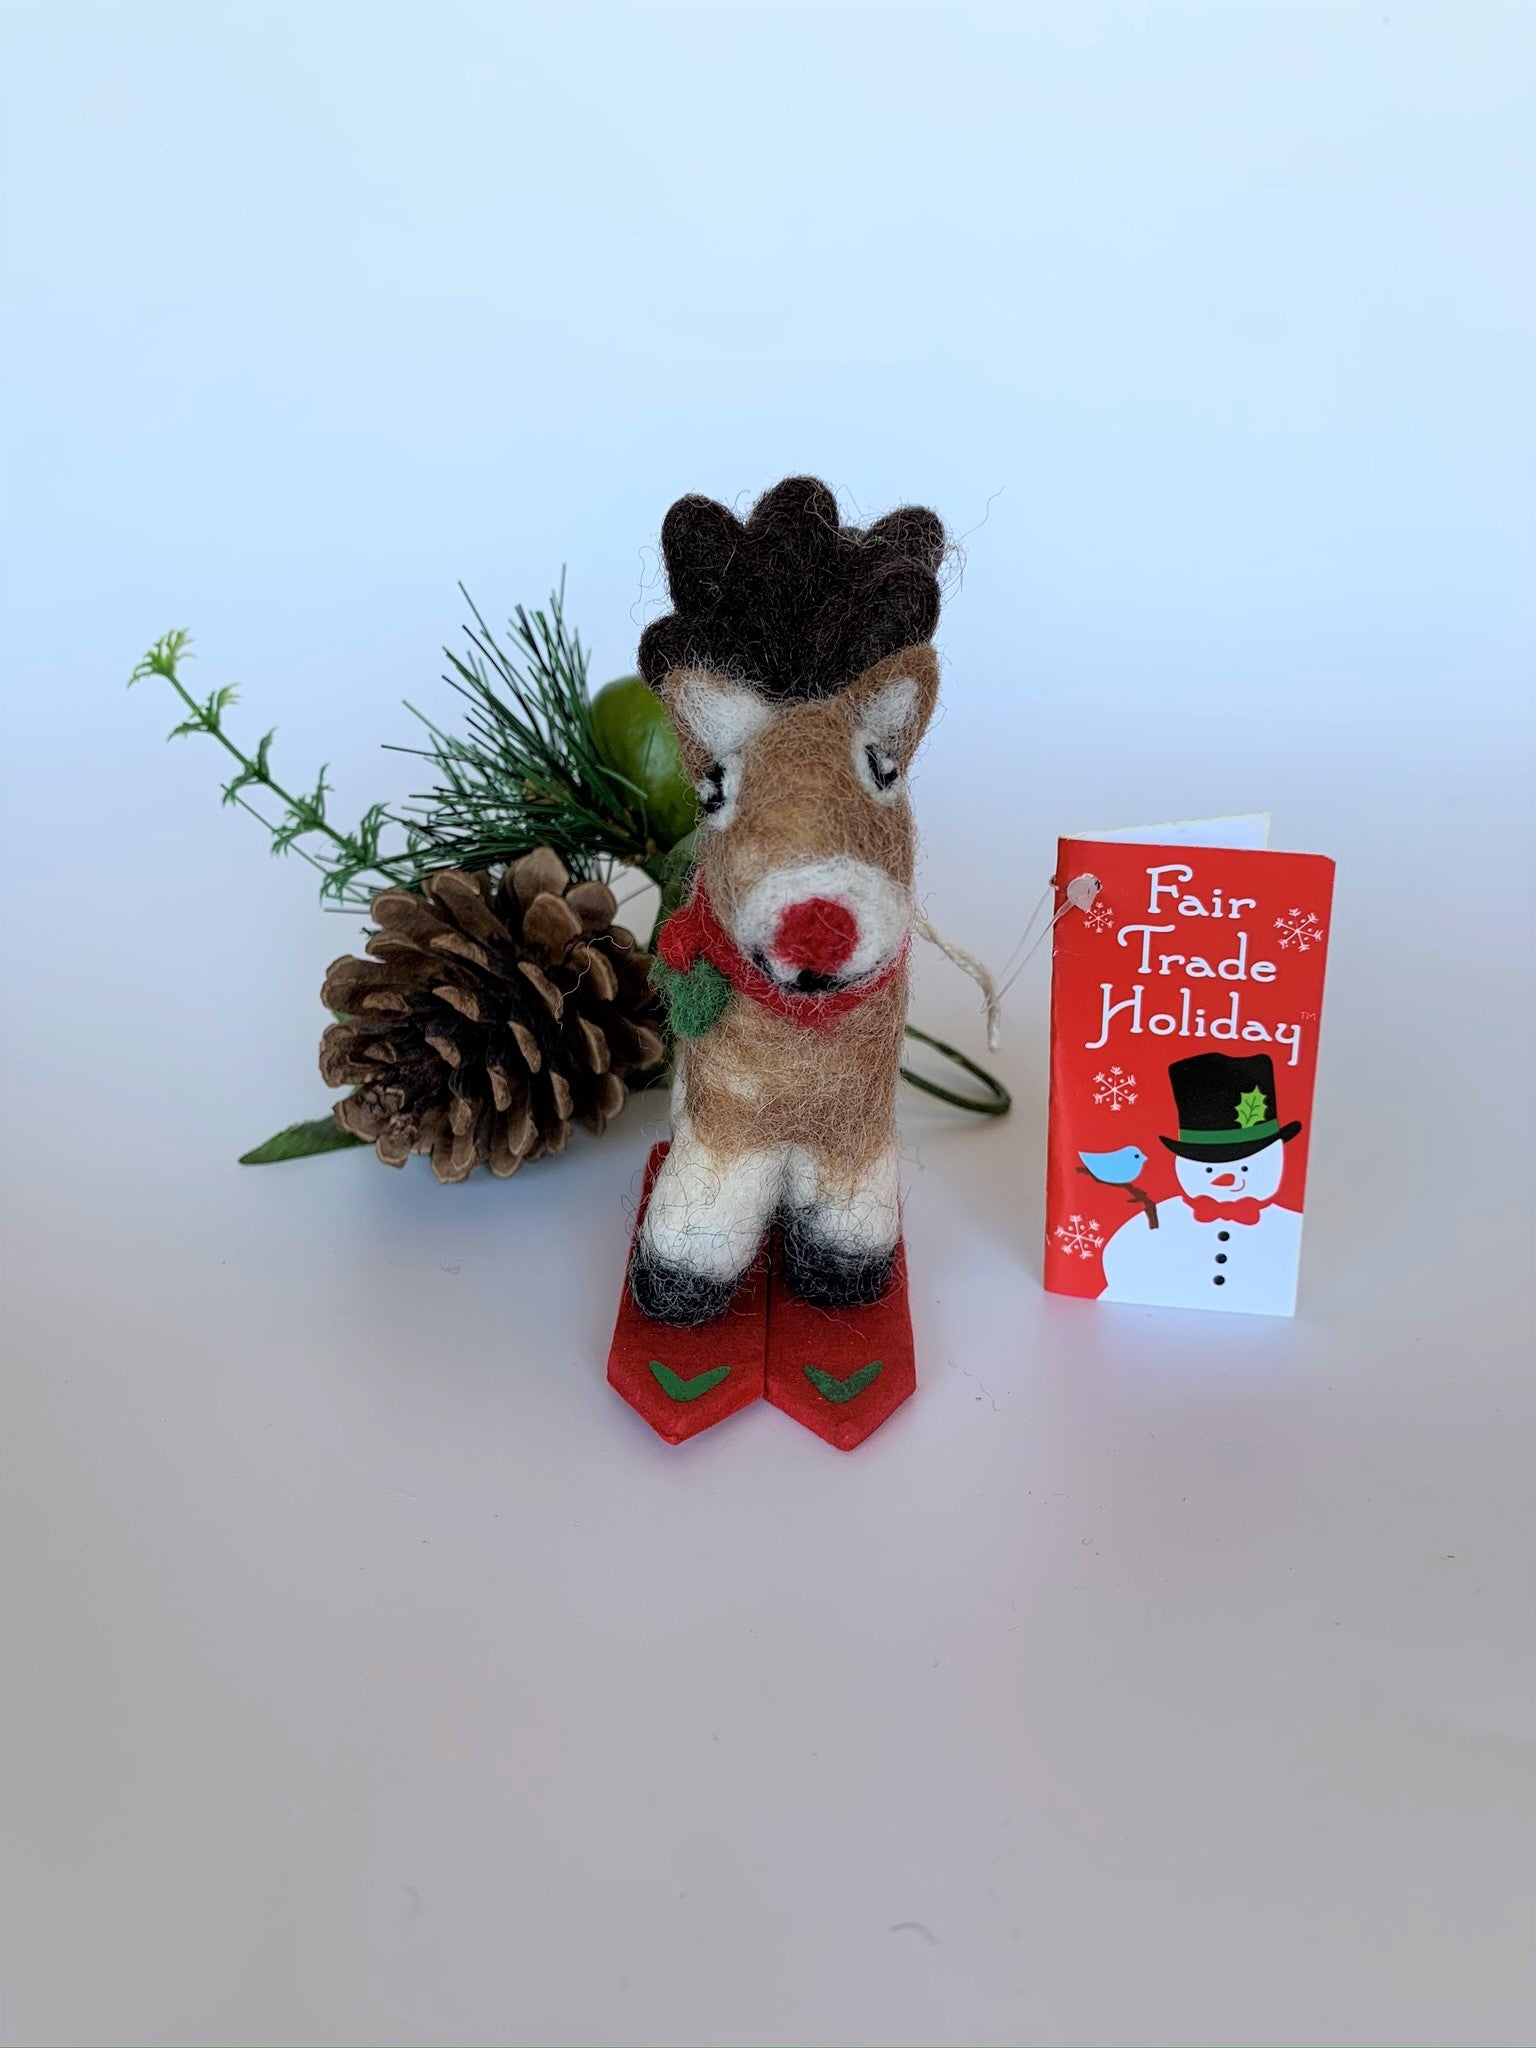 This is a skiing Rudolph the red-nosed reindeer Christmas ornament that is handcrafted (fair trade) from 100% natural wool. He is  off-white and brown with brown ears and tail, dark brown antlers, black accents (feet, mouth, etc.) and a red nose. He wears a red and green winter scarf with an accent of holly and  stands on a pair of red skis with green accents on the front. Approximately 3.5"x1.5"x1.75".  He comes with a detachable fair trade holiday "to/from" tag to use if giving as a gift.